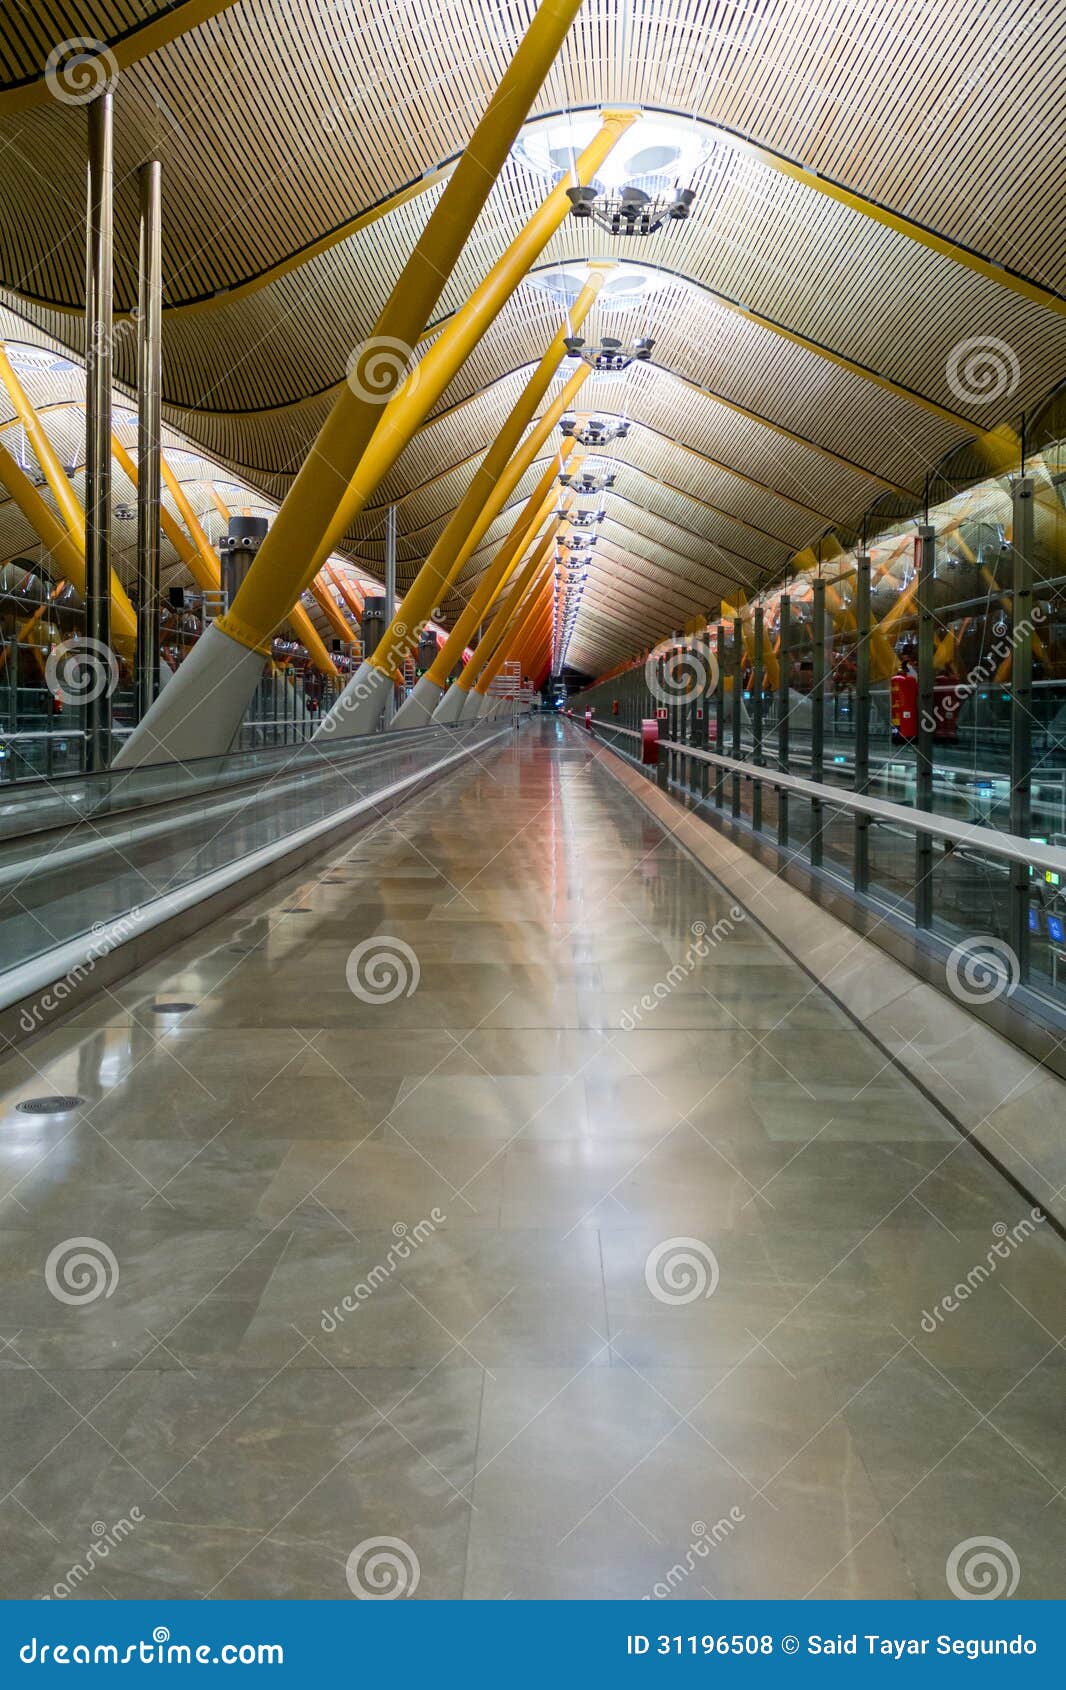 empty hall in madrid barajas airport